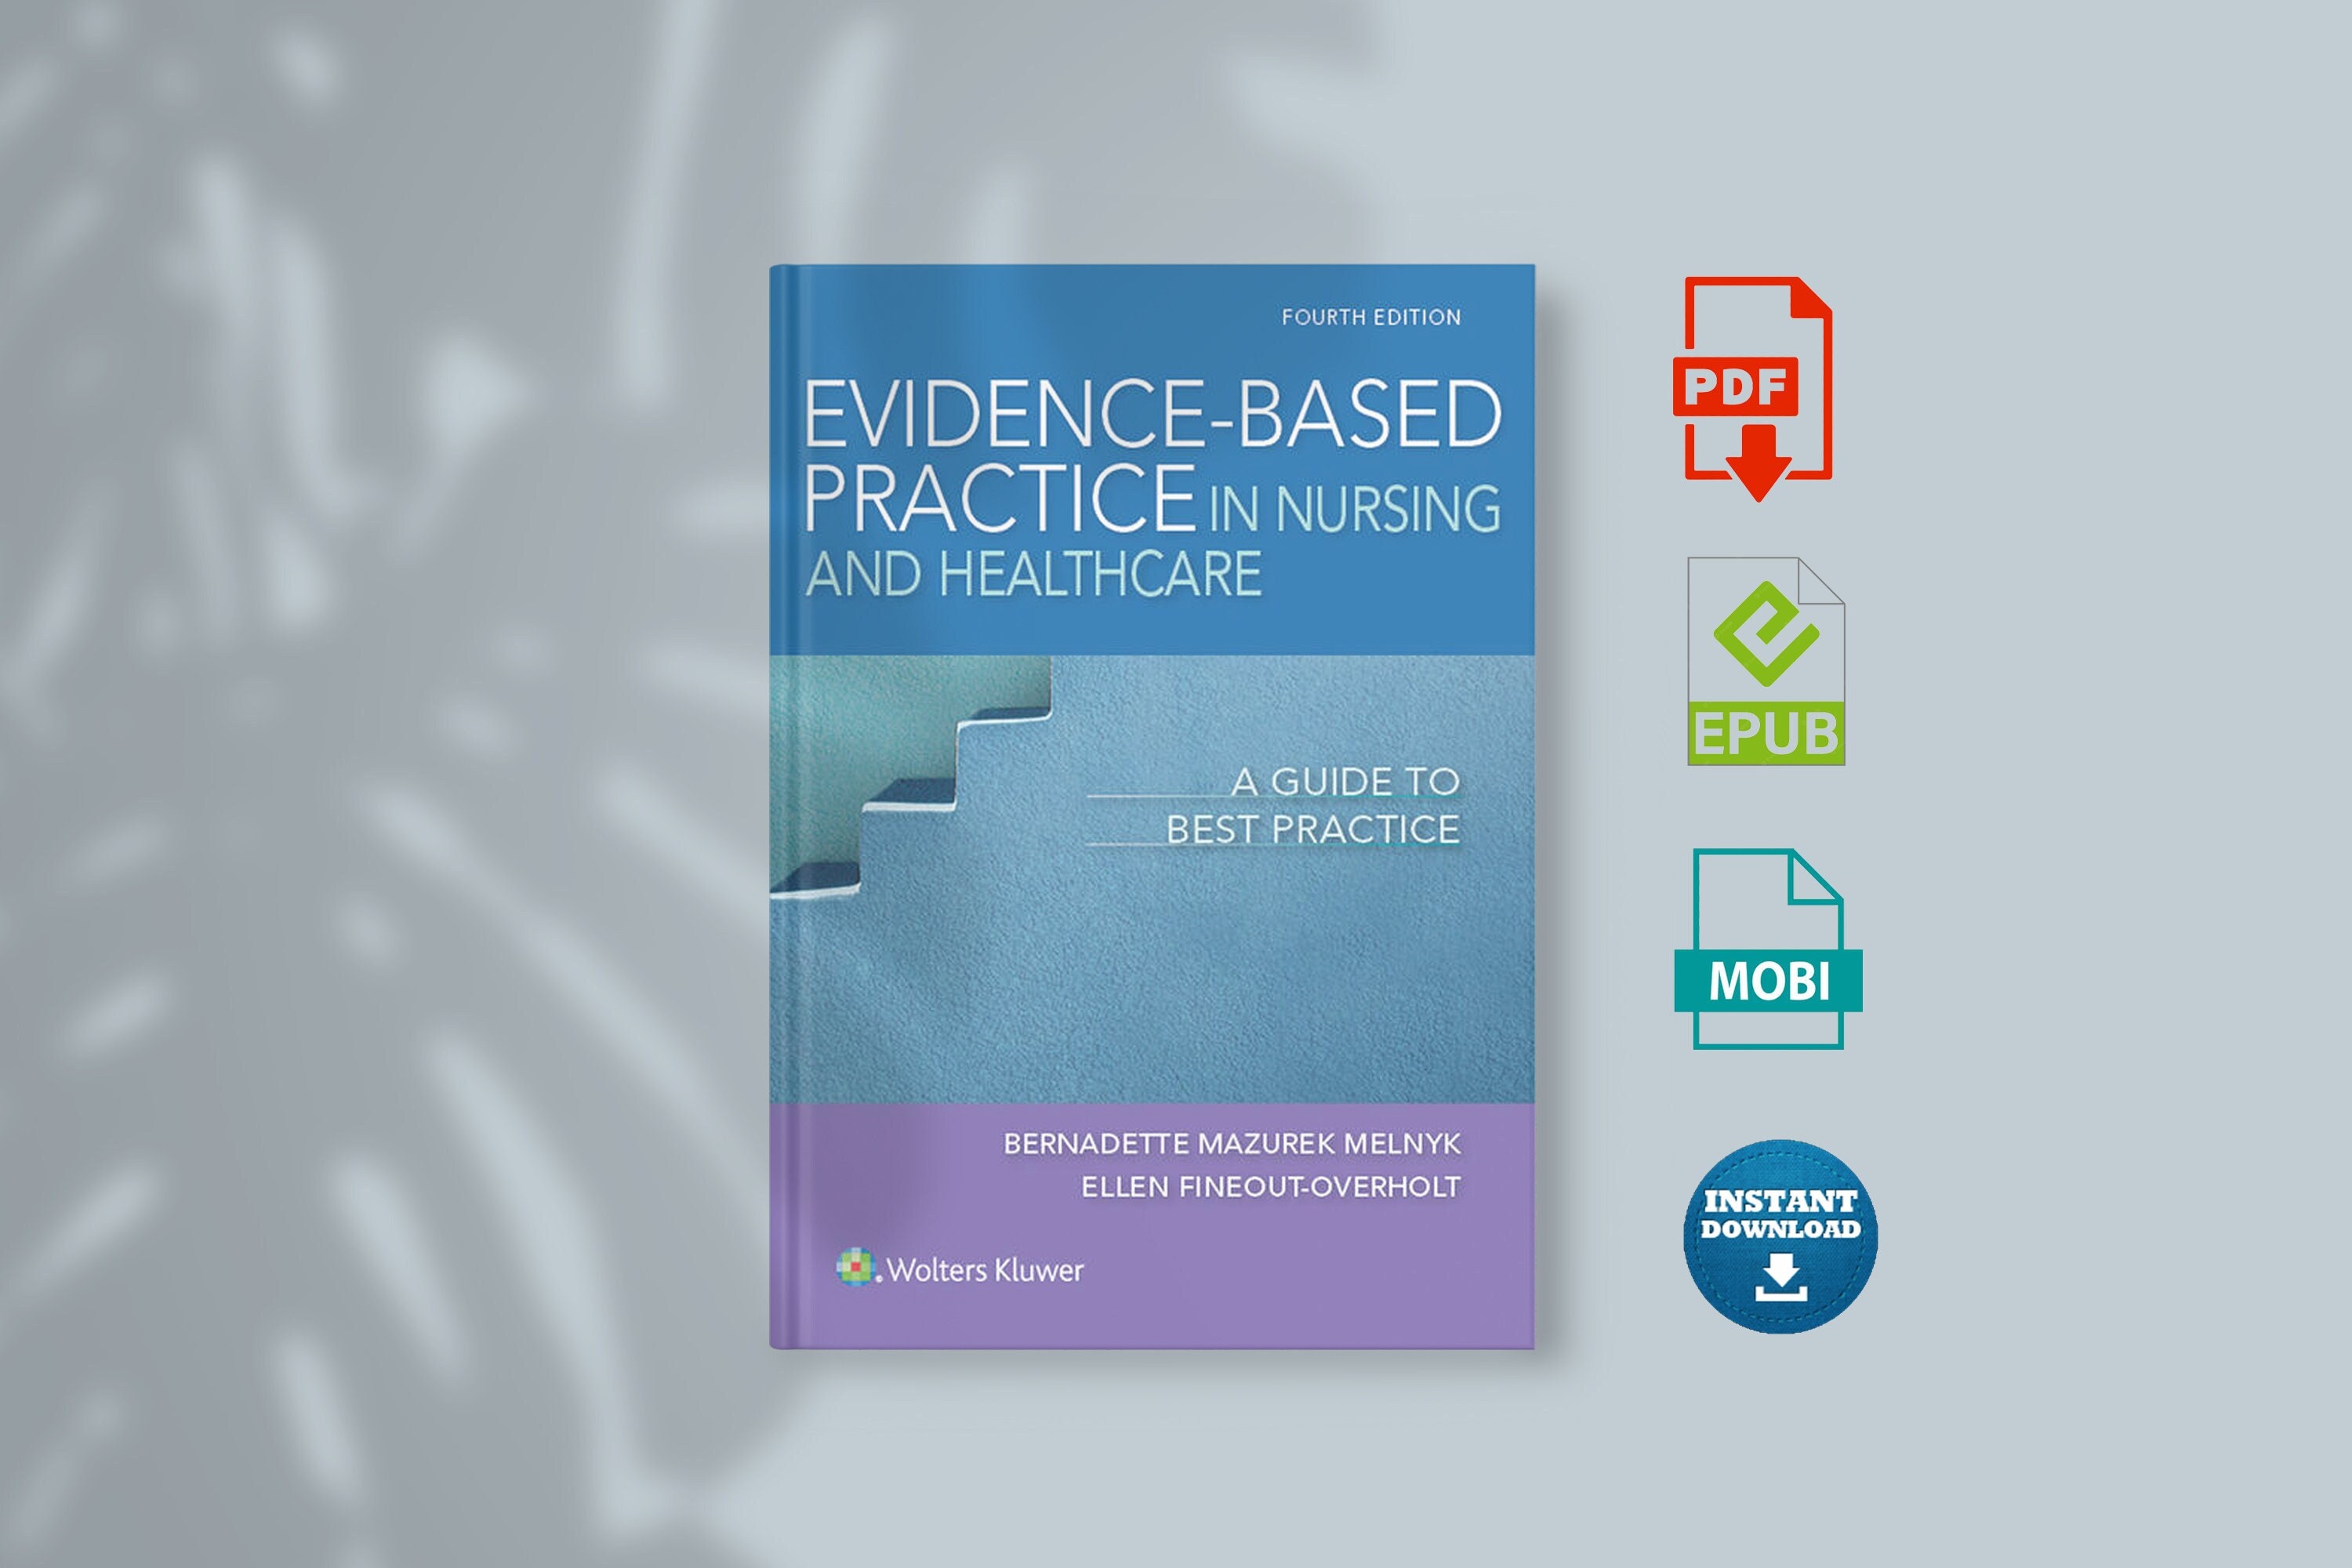 Etsy　Healthcare:　Nursing　in　A　Evidence-based　to　Practice　Guide